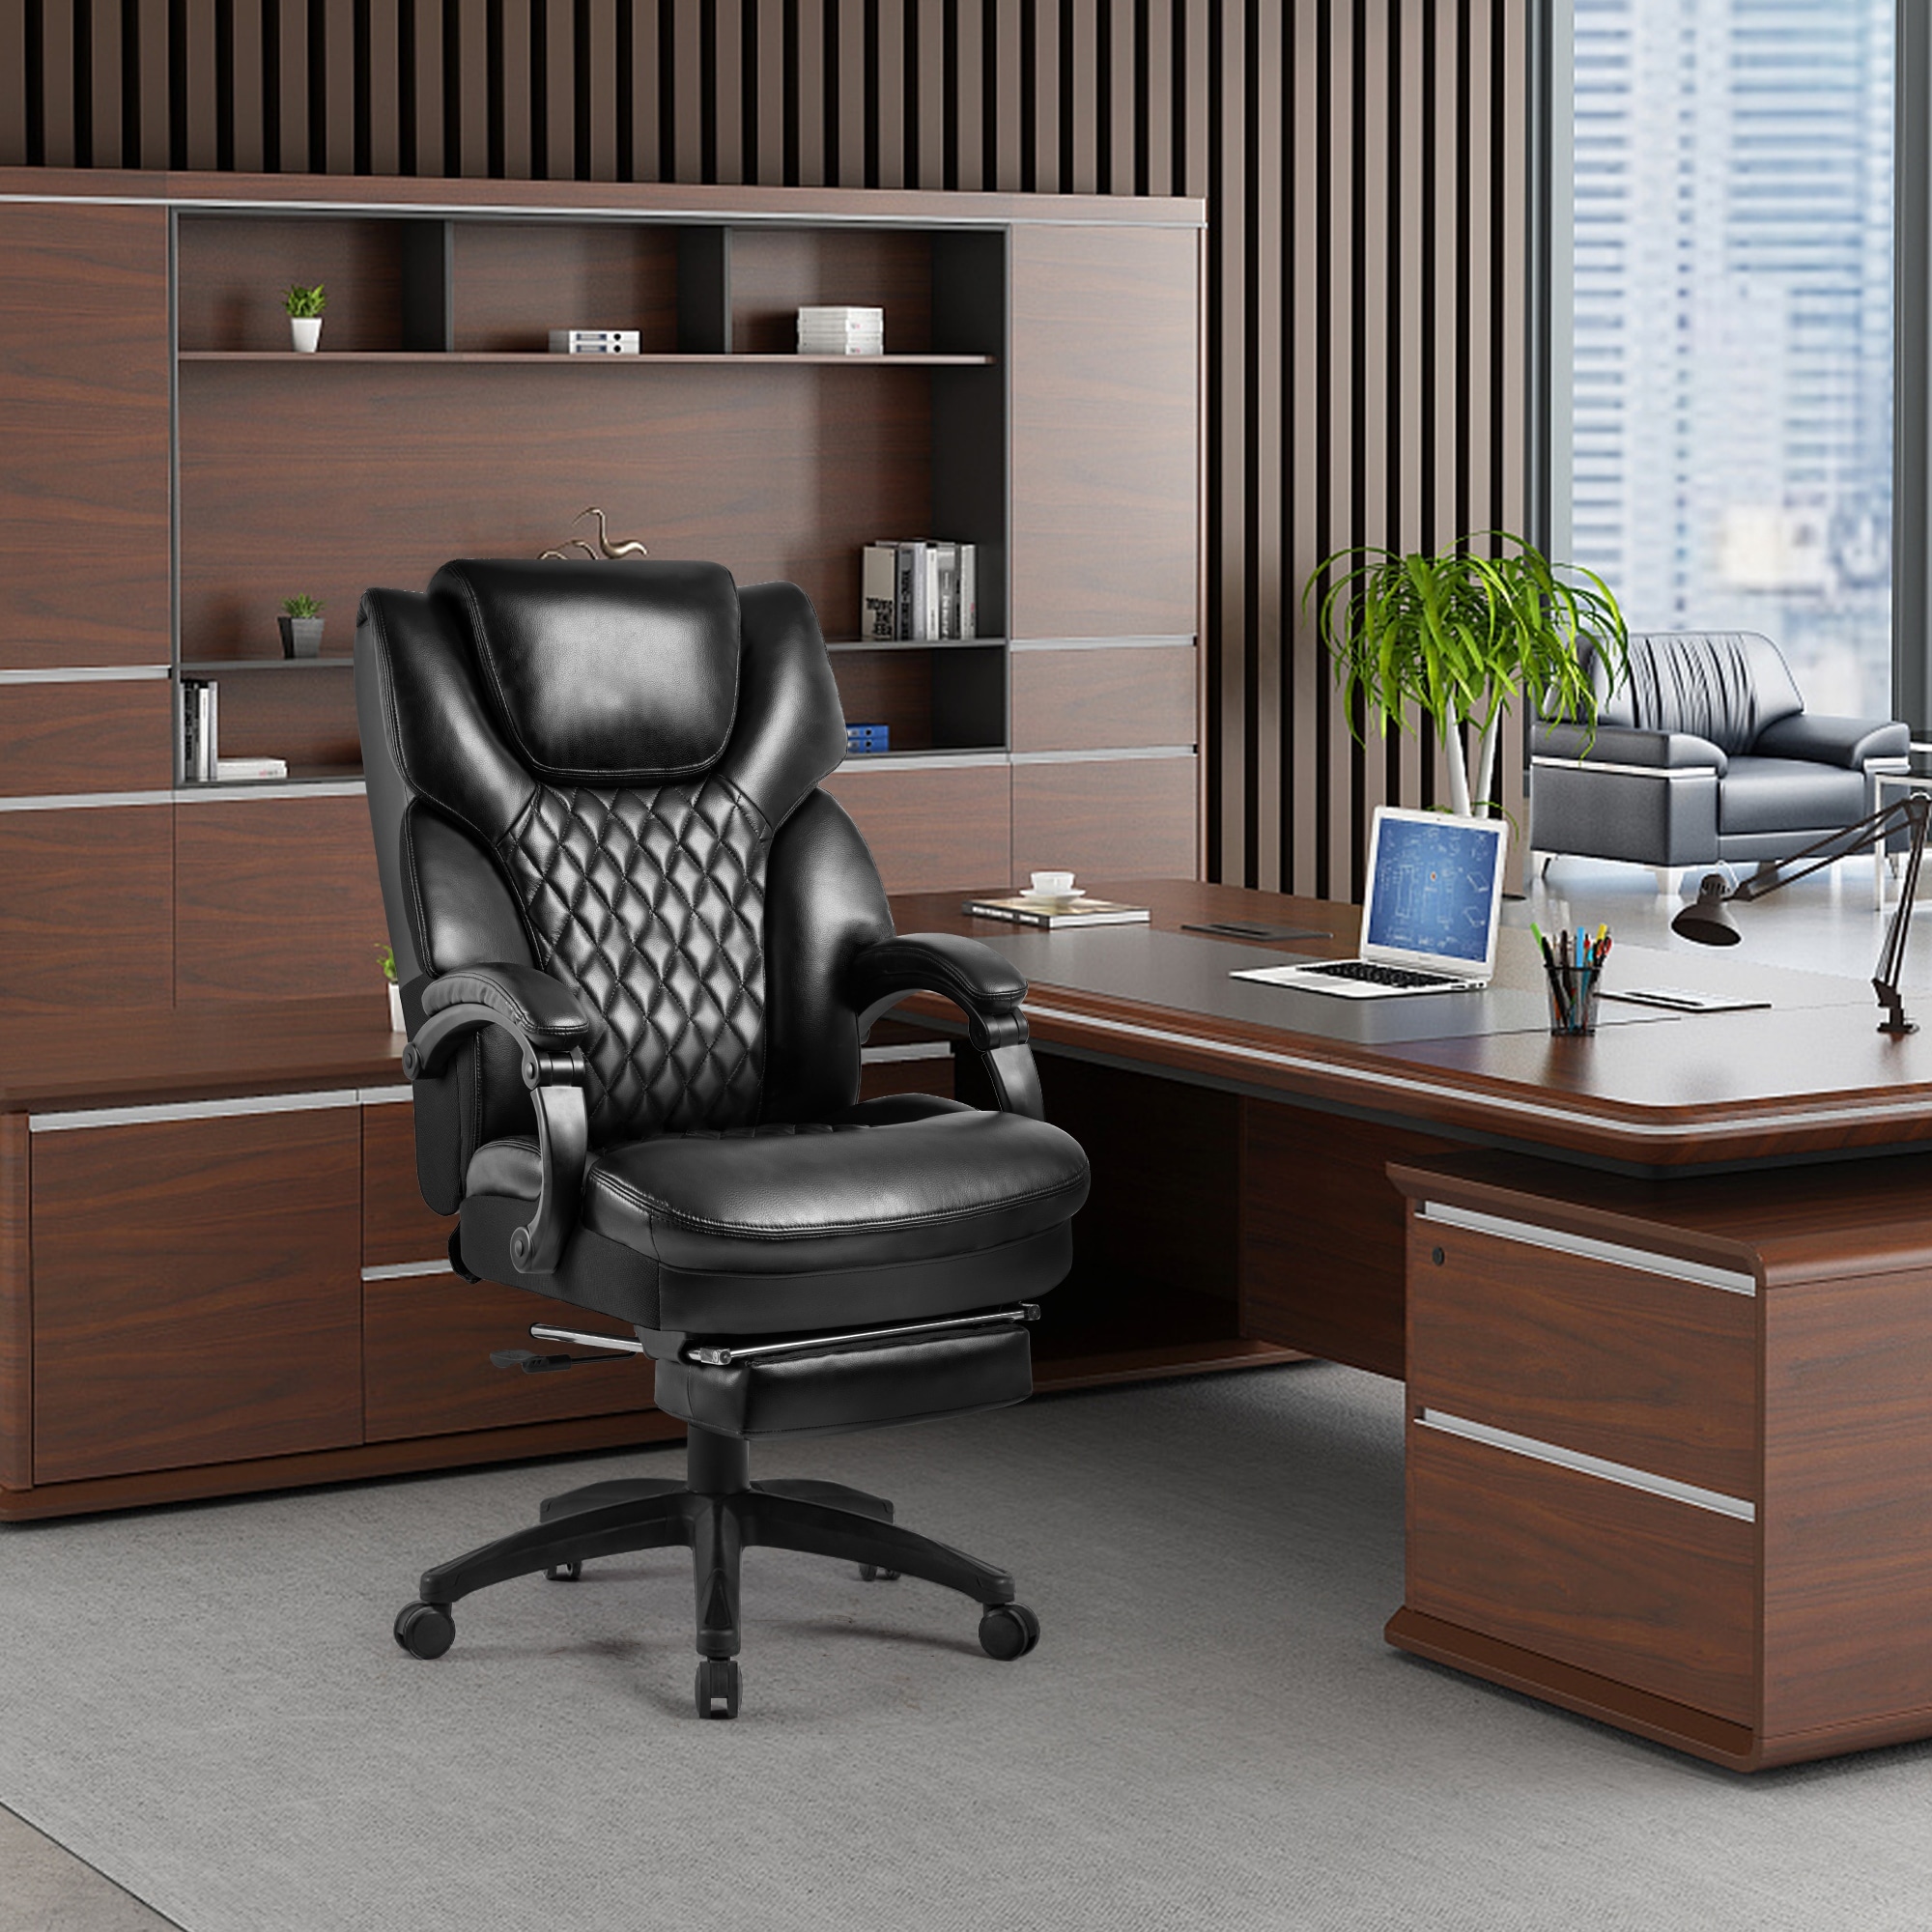 Vinsetto 484lbs Big and Tall Ergonomic Executive Office Chair High Back Adjustable Computer Task Chair Swivel PU Leather - Brown